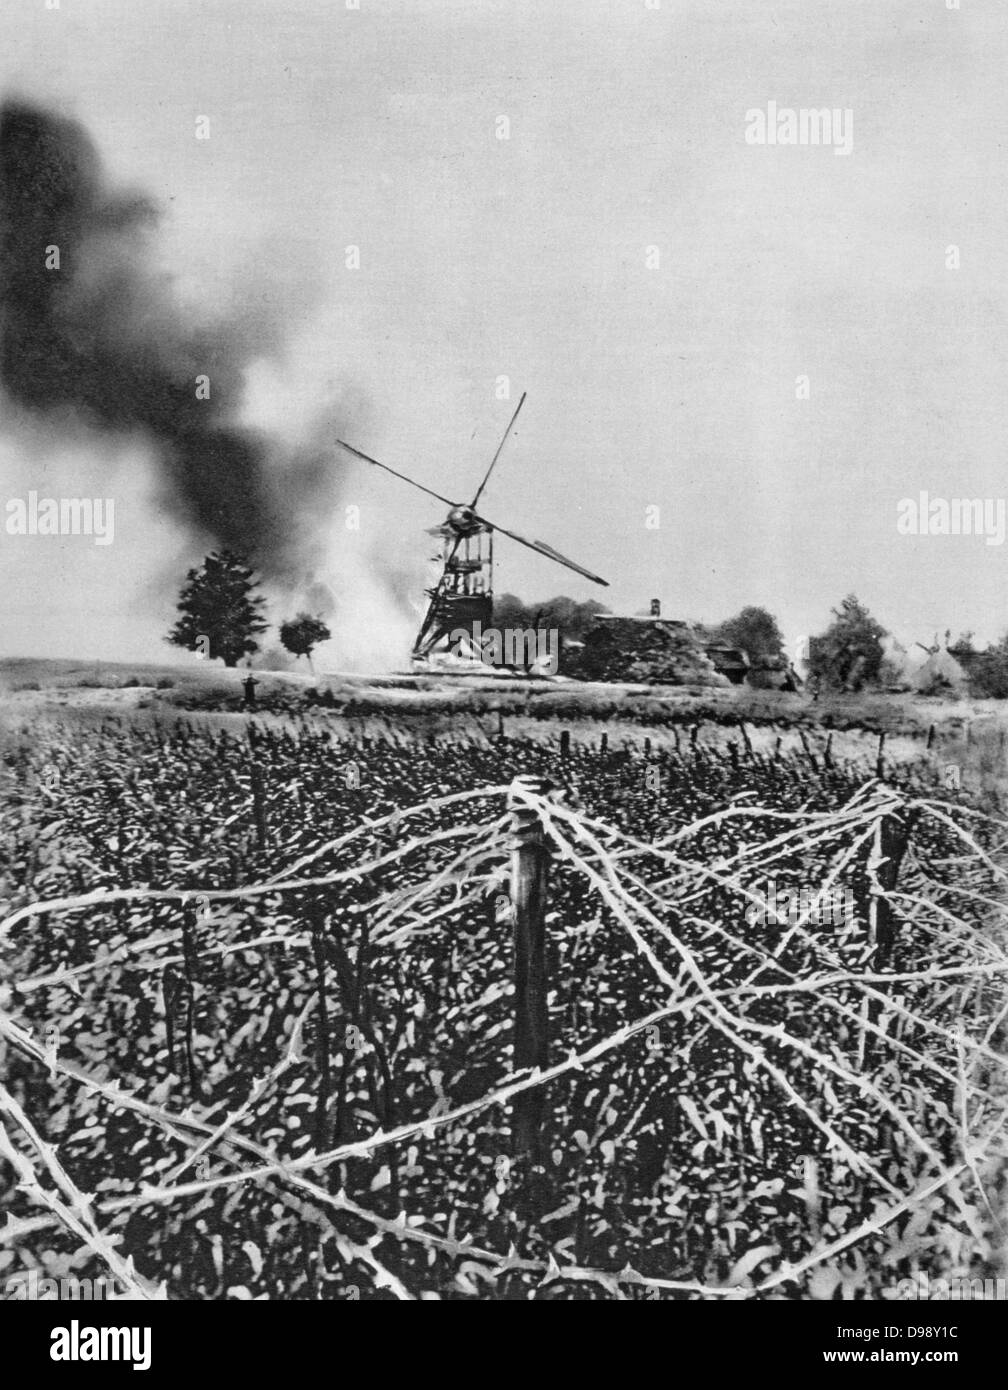 World War I 1914-1918: Windmill destroyed by German shellfire. Barbed wire defences in foreground. France World War I. From 'Le Flambeau', Paris, September 1915. Stock Photo